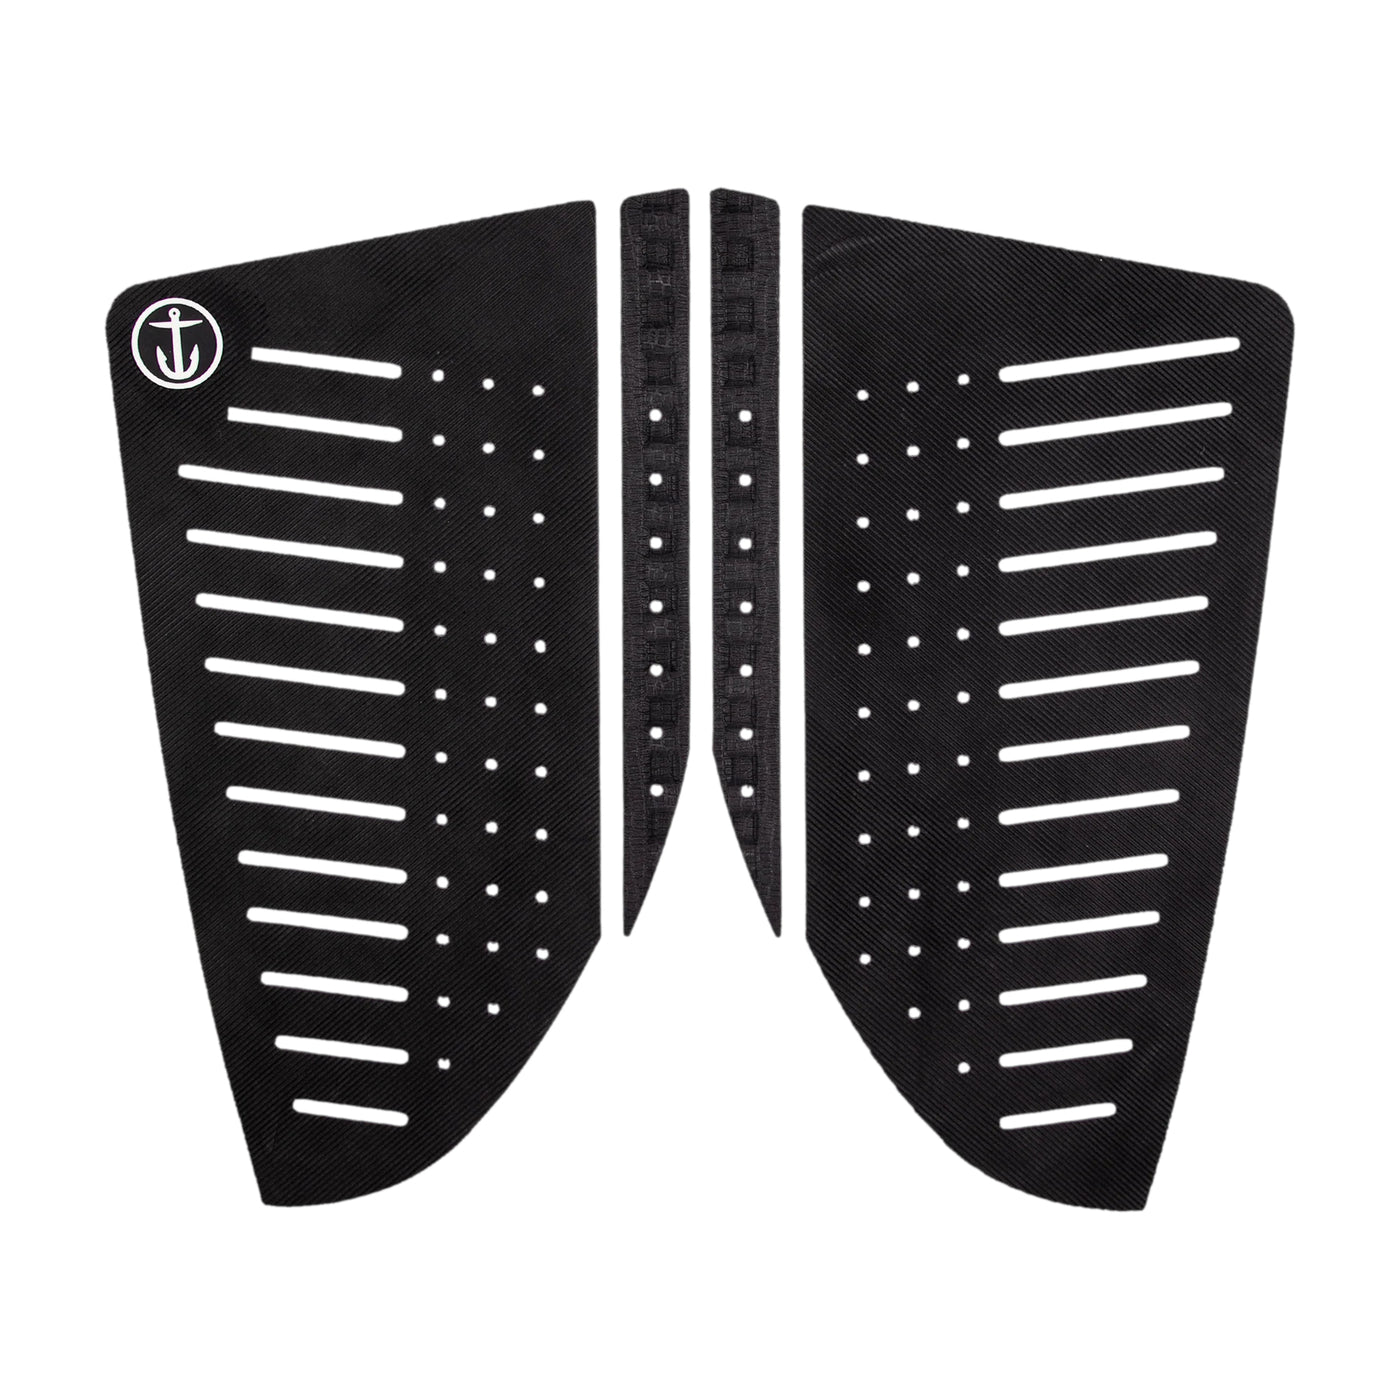 Captain Fin Trooper 2 Traction Pad